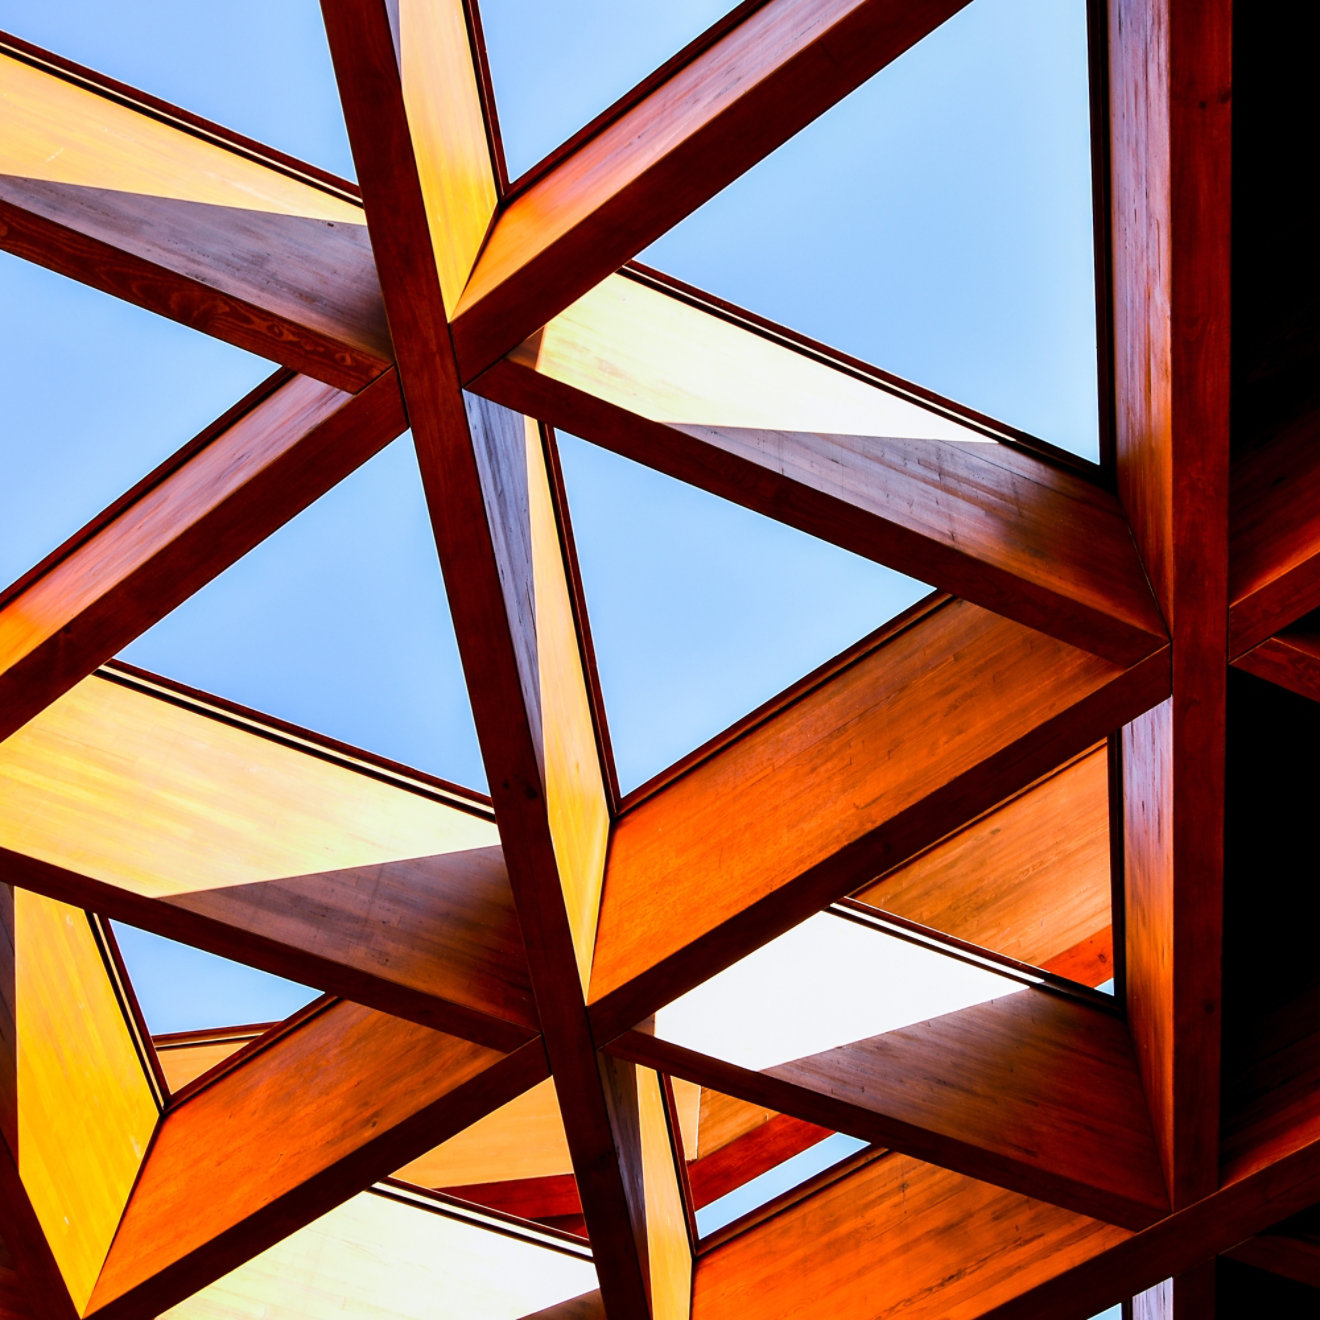 A glass roof with a red triangular framework